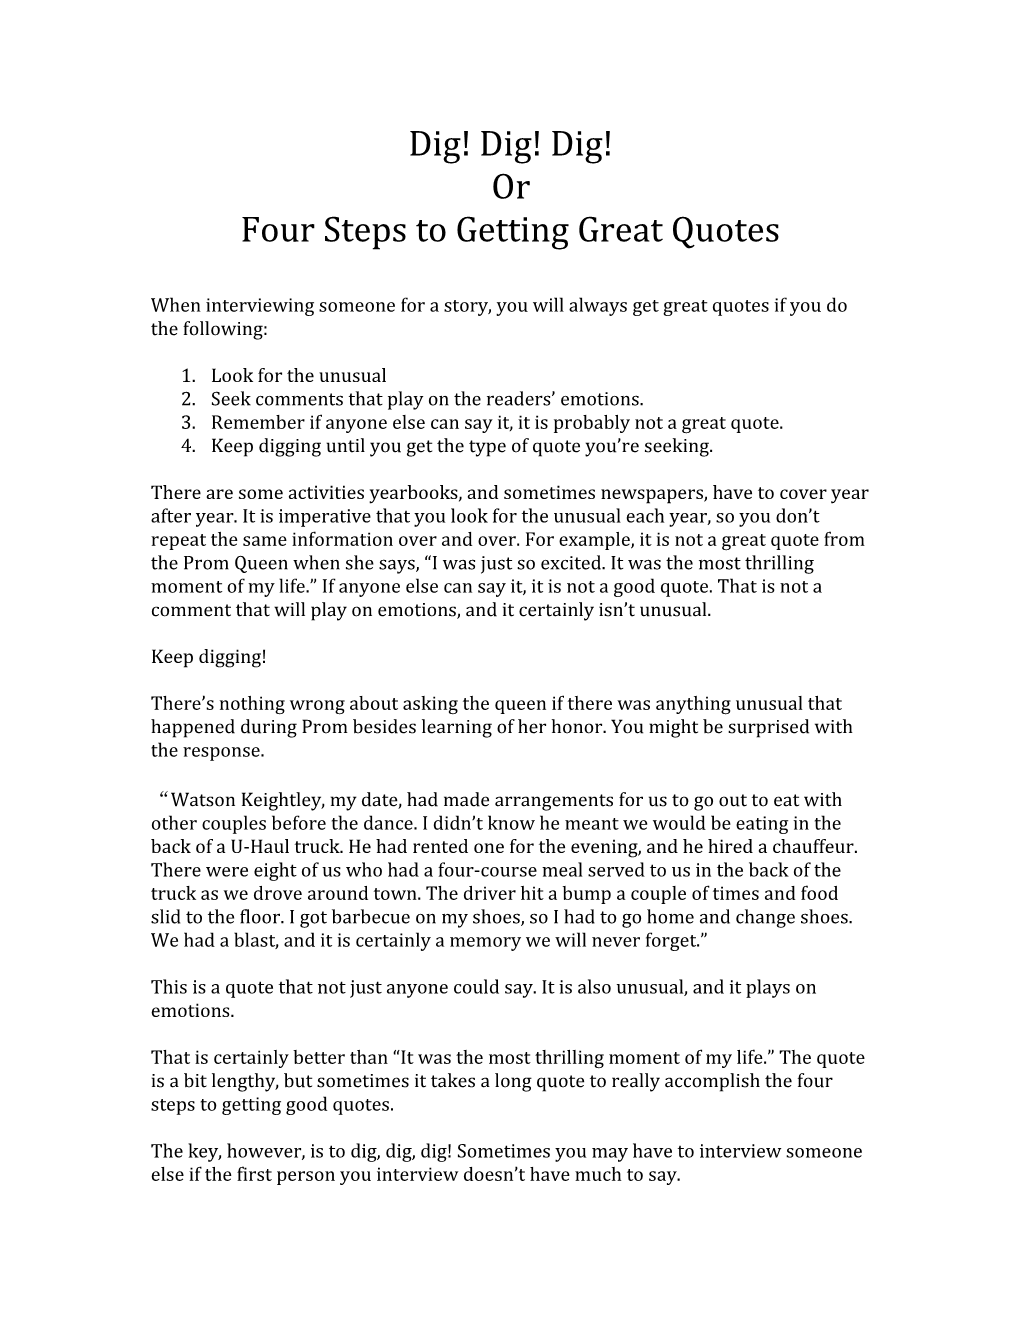 Four Steps to Getting Great Quotes